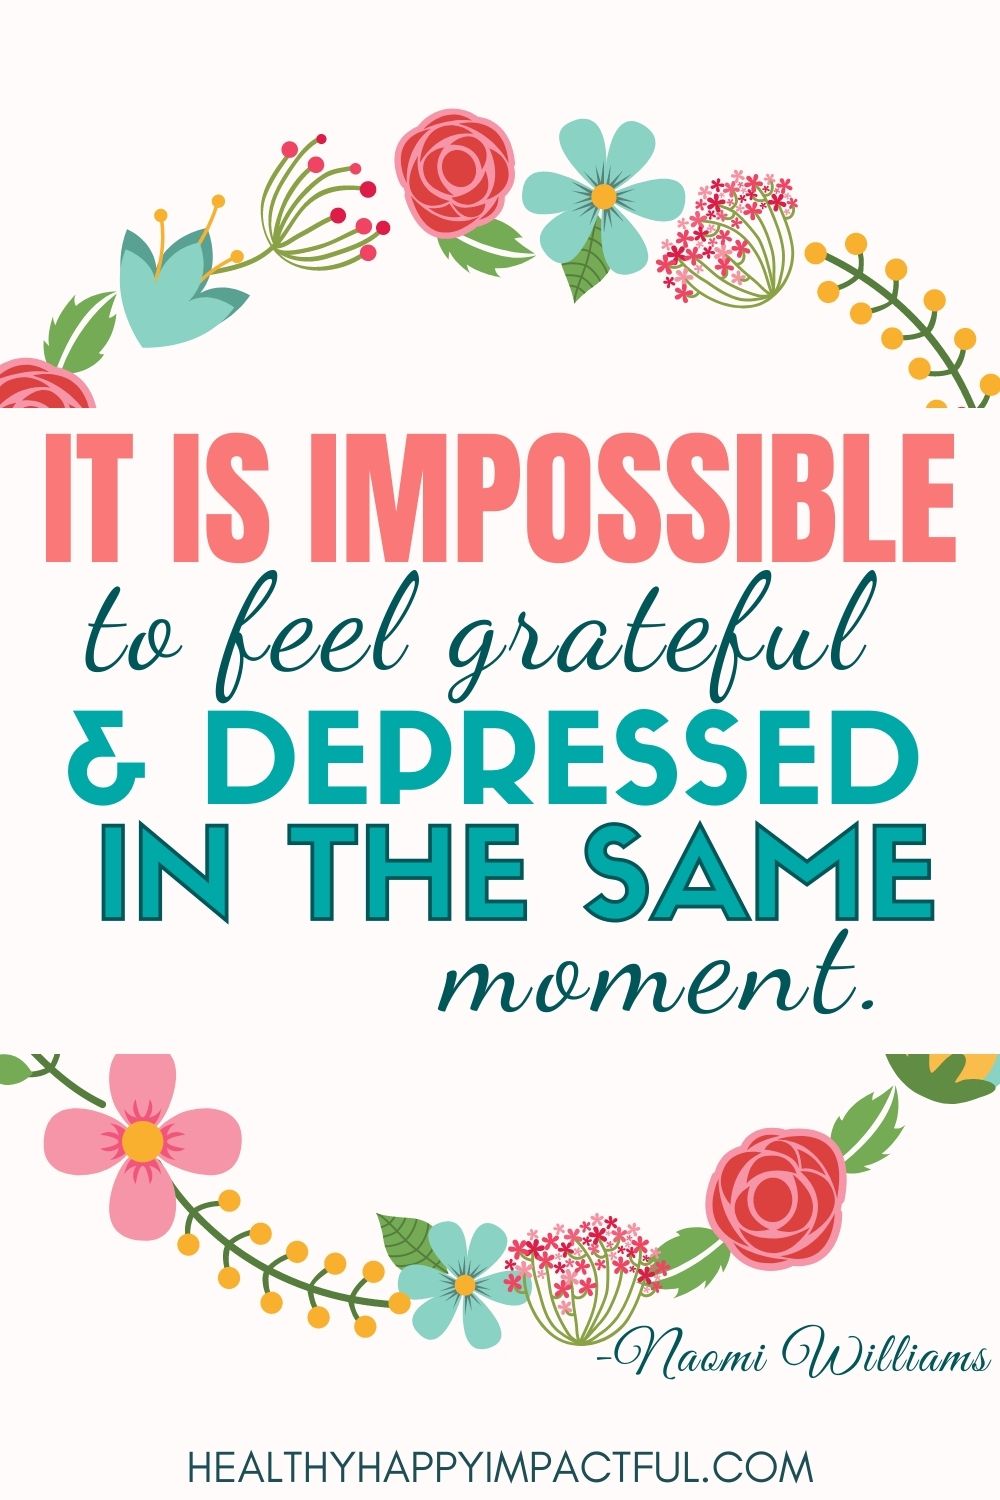 It is impossible to feel grateful and depressed at the same time.